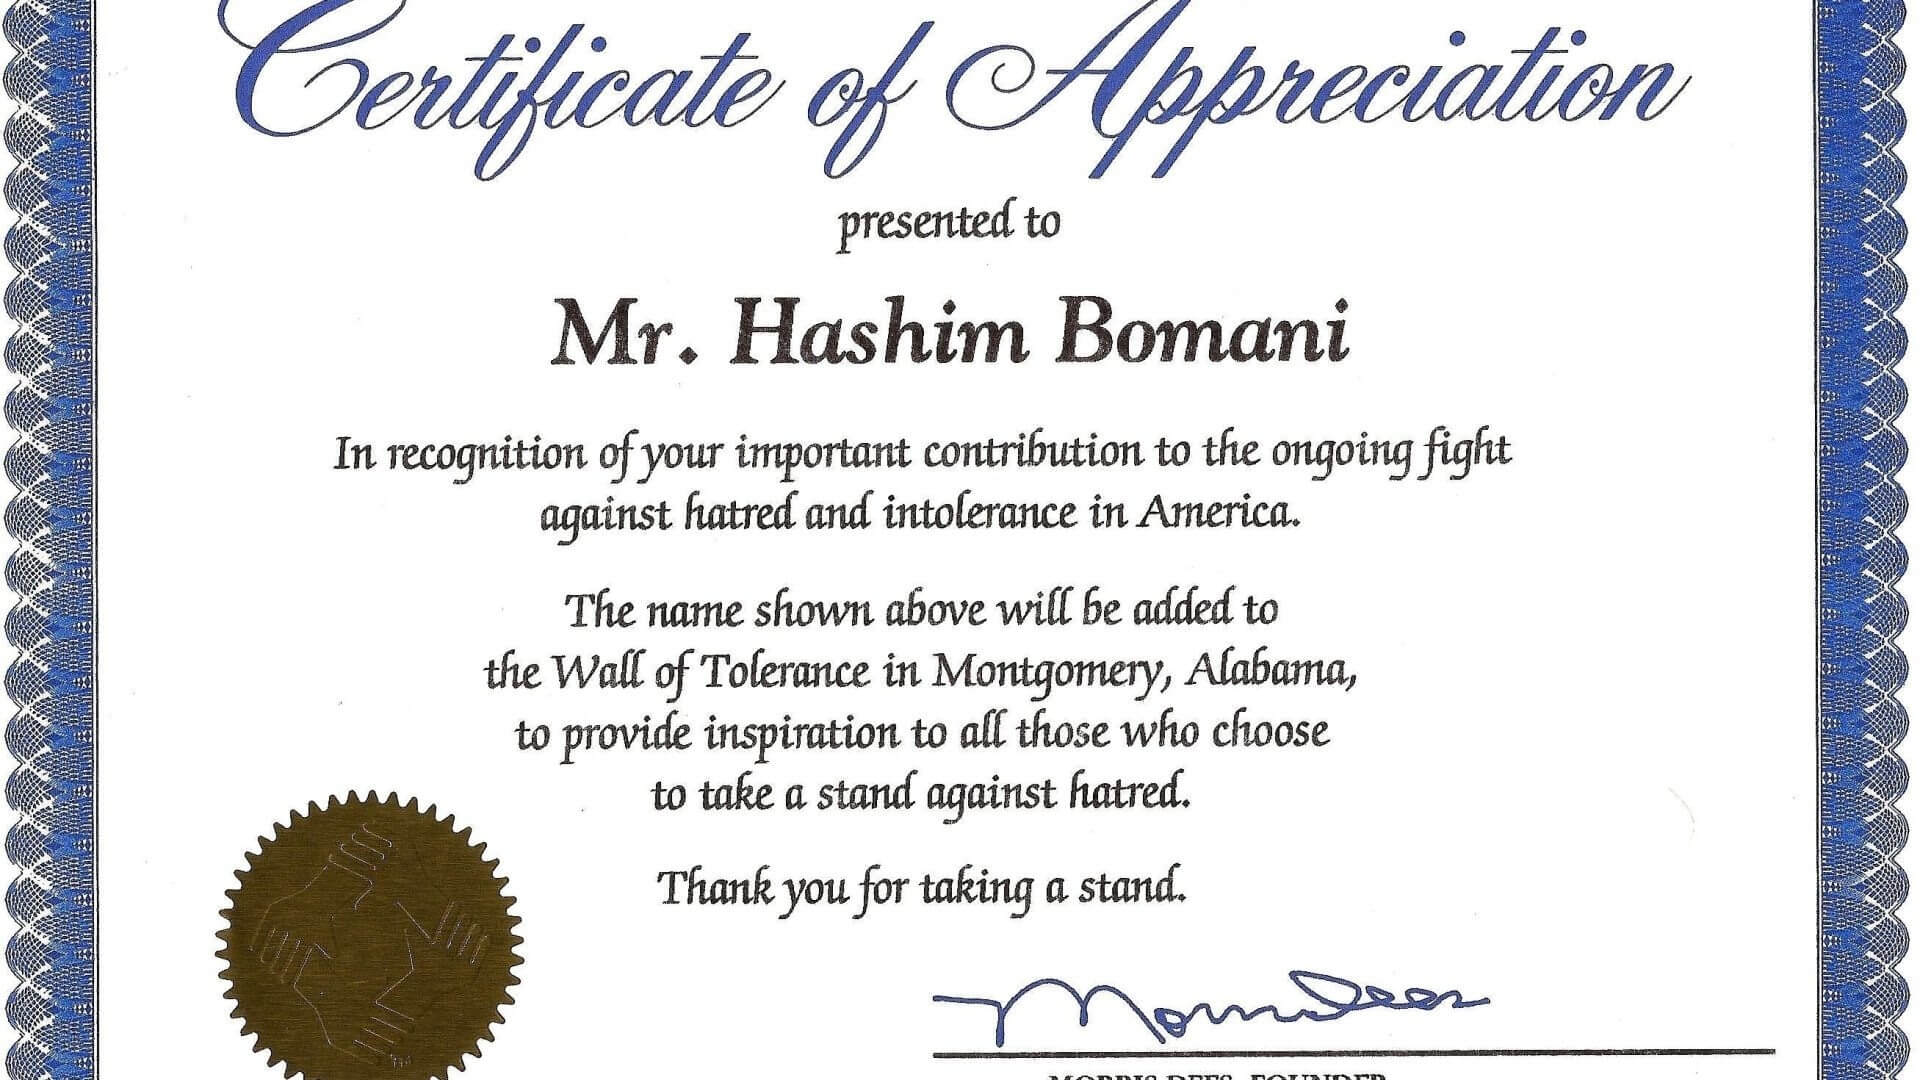 037 Certificates Of Appreciation Templates Free Sample Inside Thanks Certificate Template